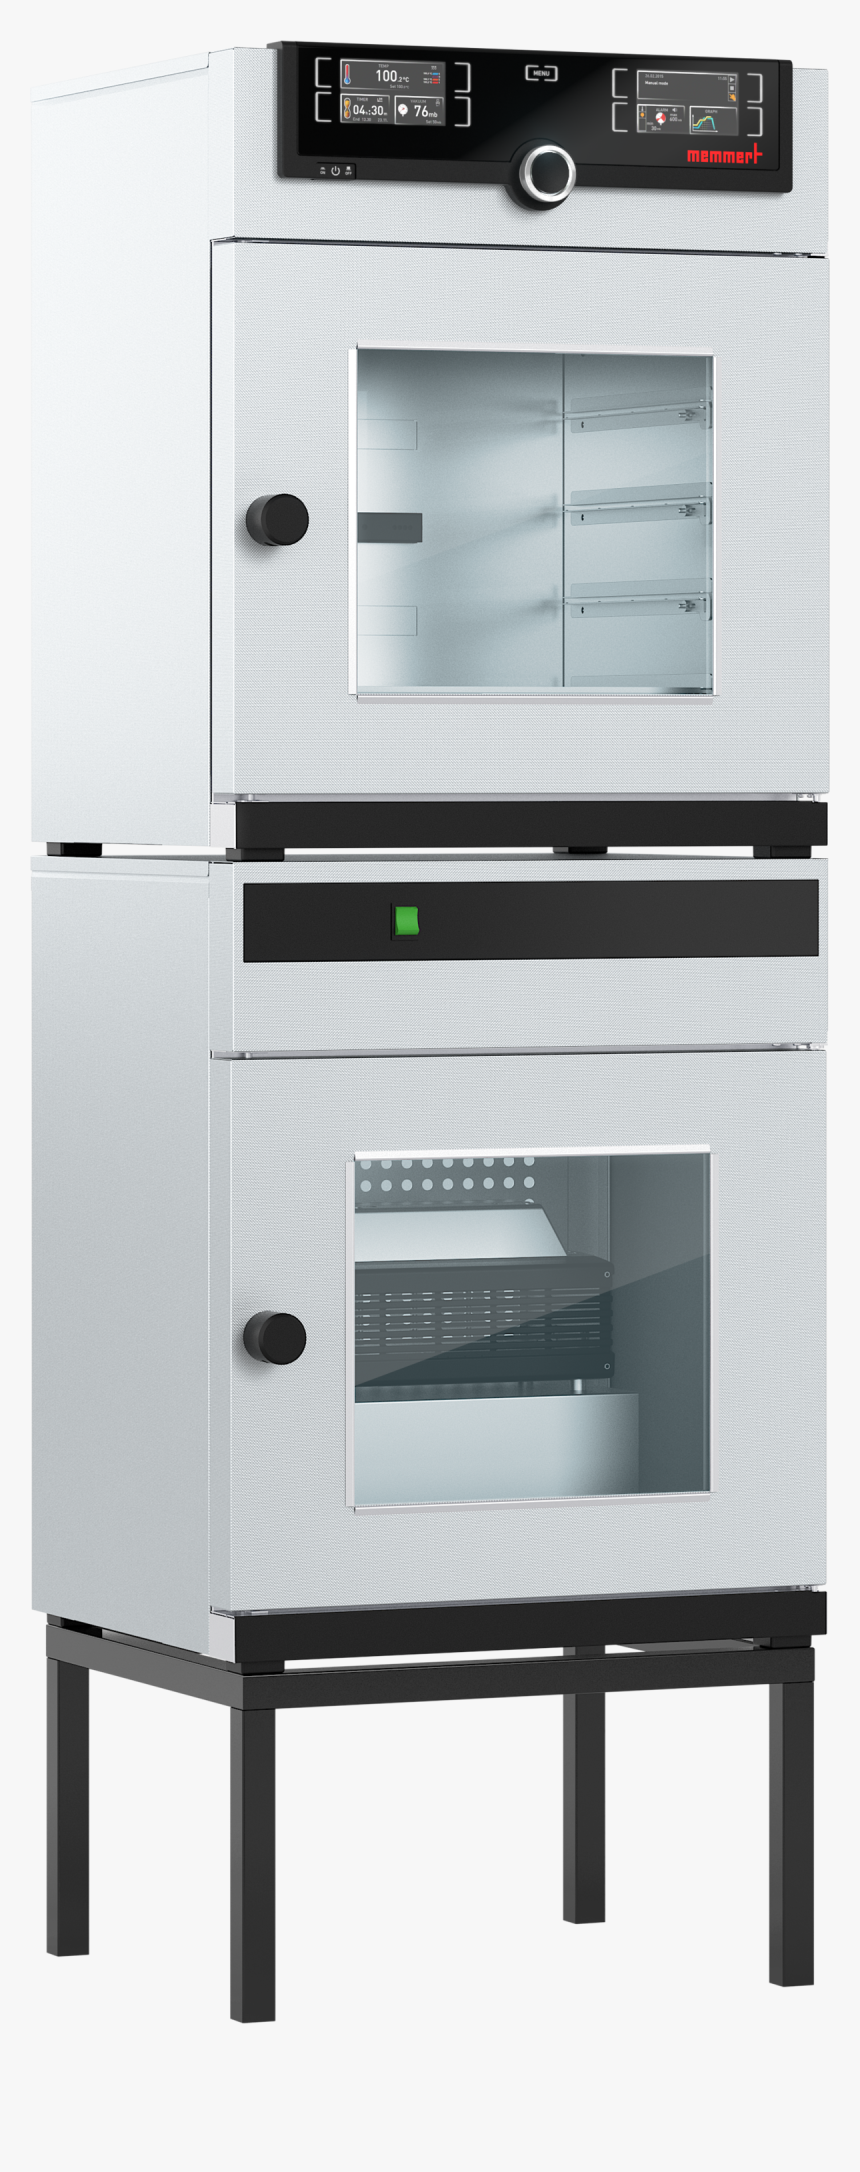 Vacuum Oven Uses, HD Png Download, Free Download